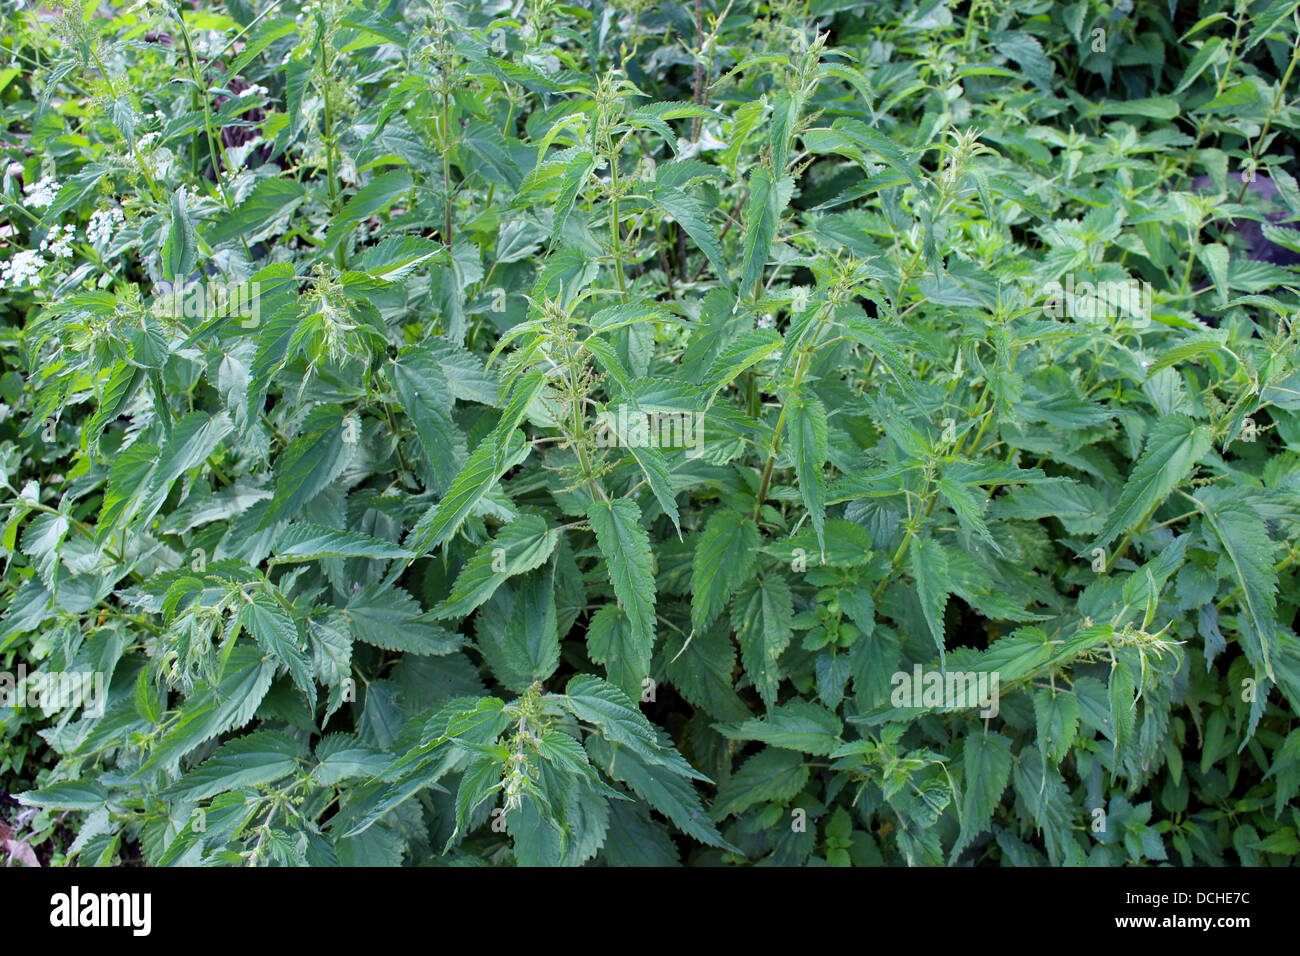 bushes of cruel and green plants of a nettle Stock Photo